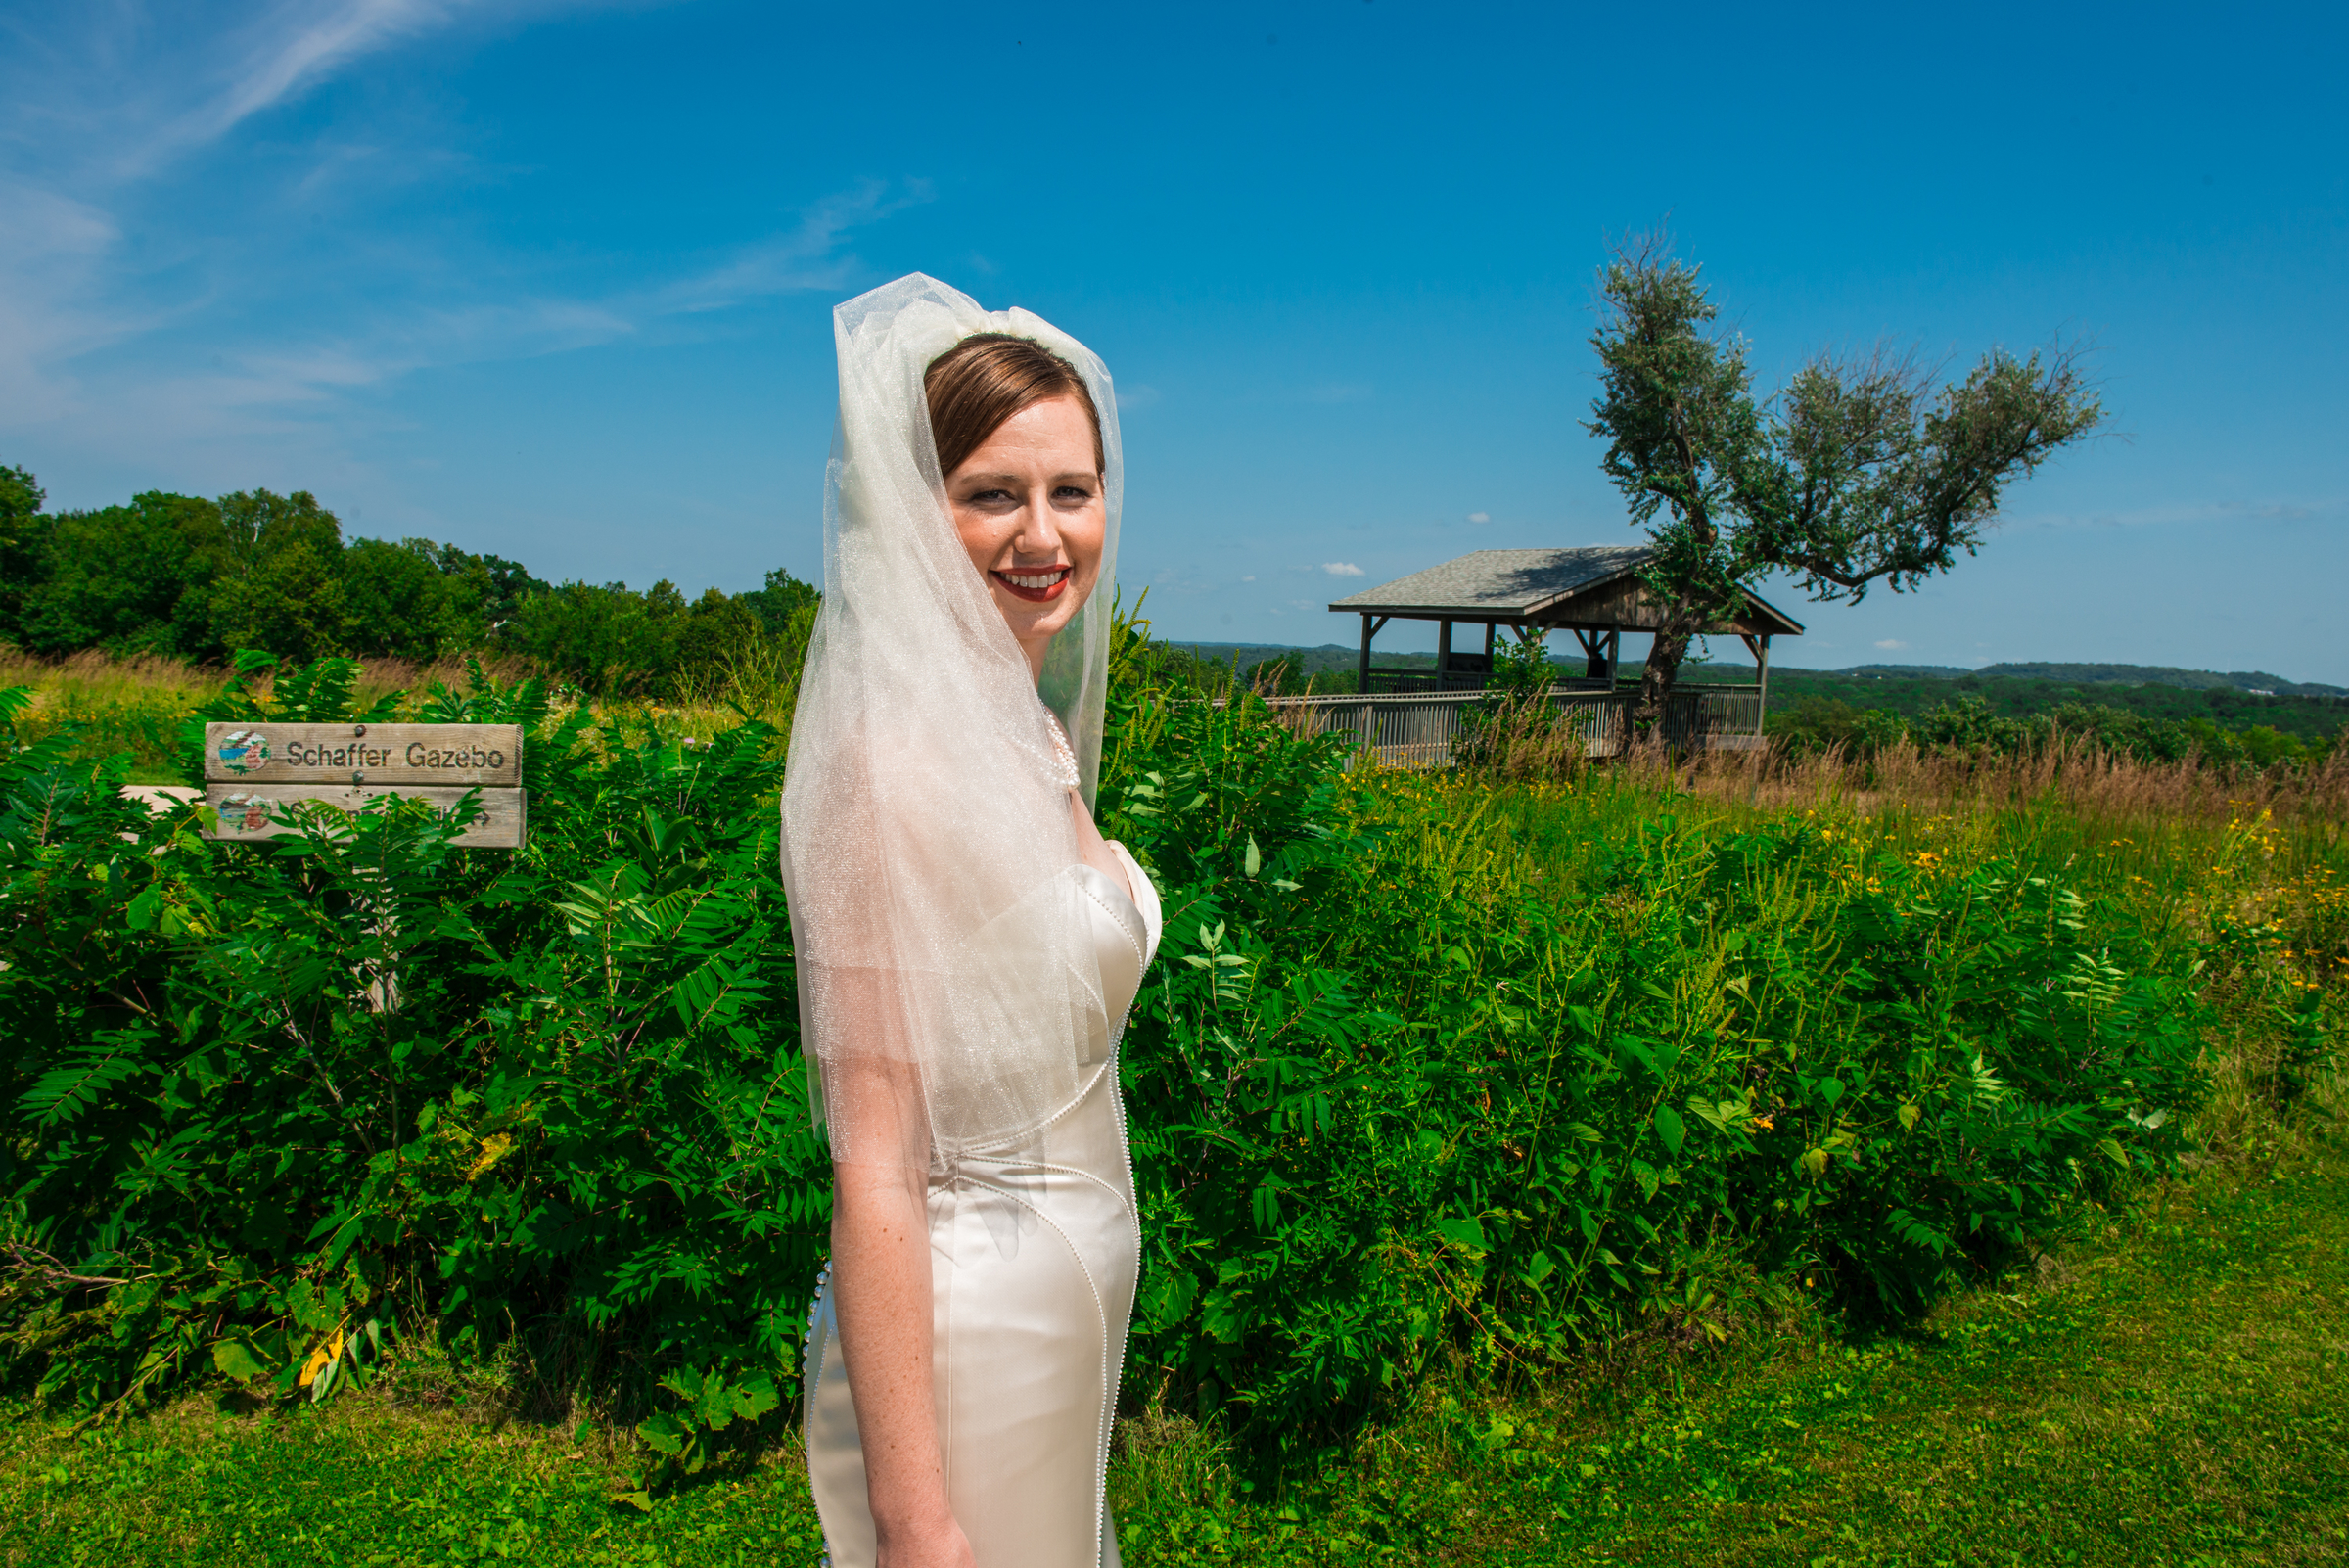 Bride and groom share first look at Carpenter Nature Center in Hastings, Minnesota.